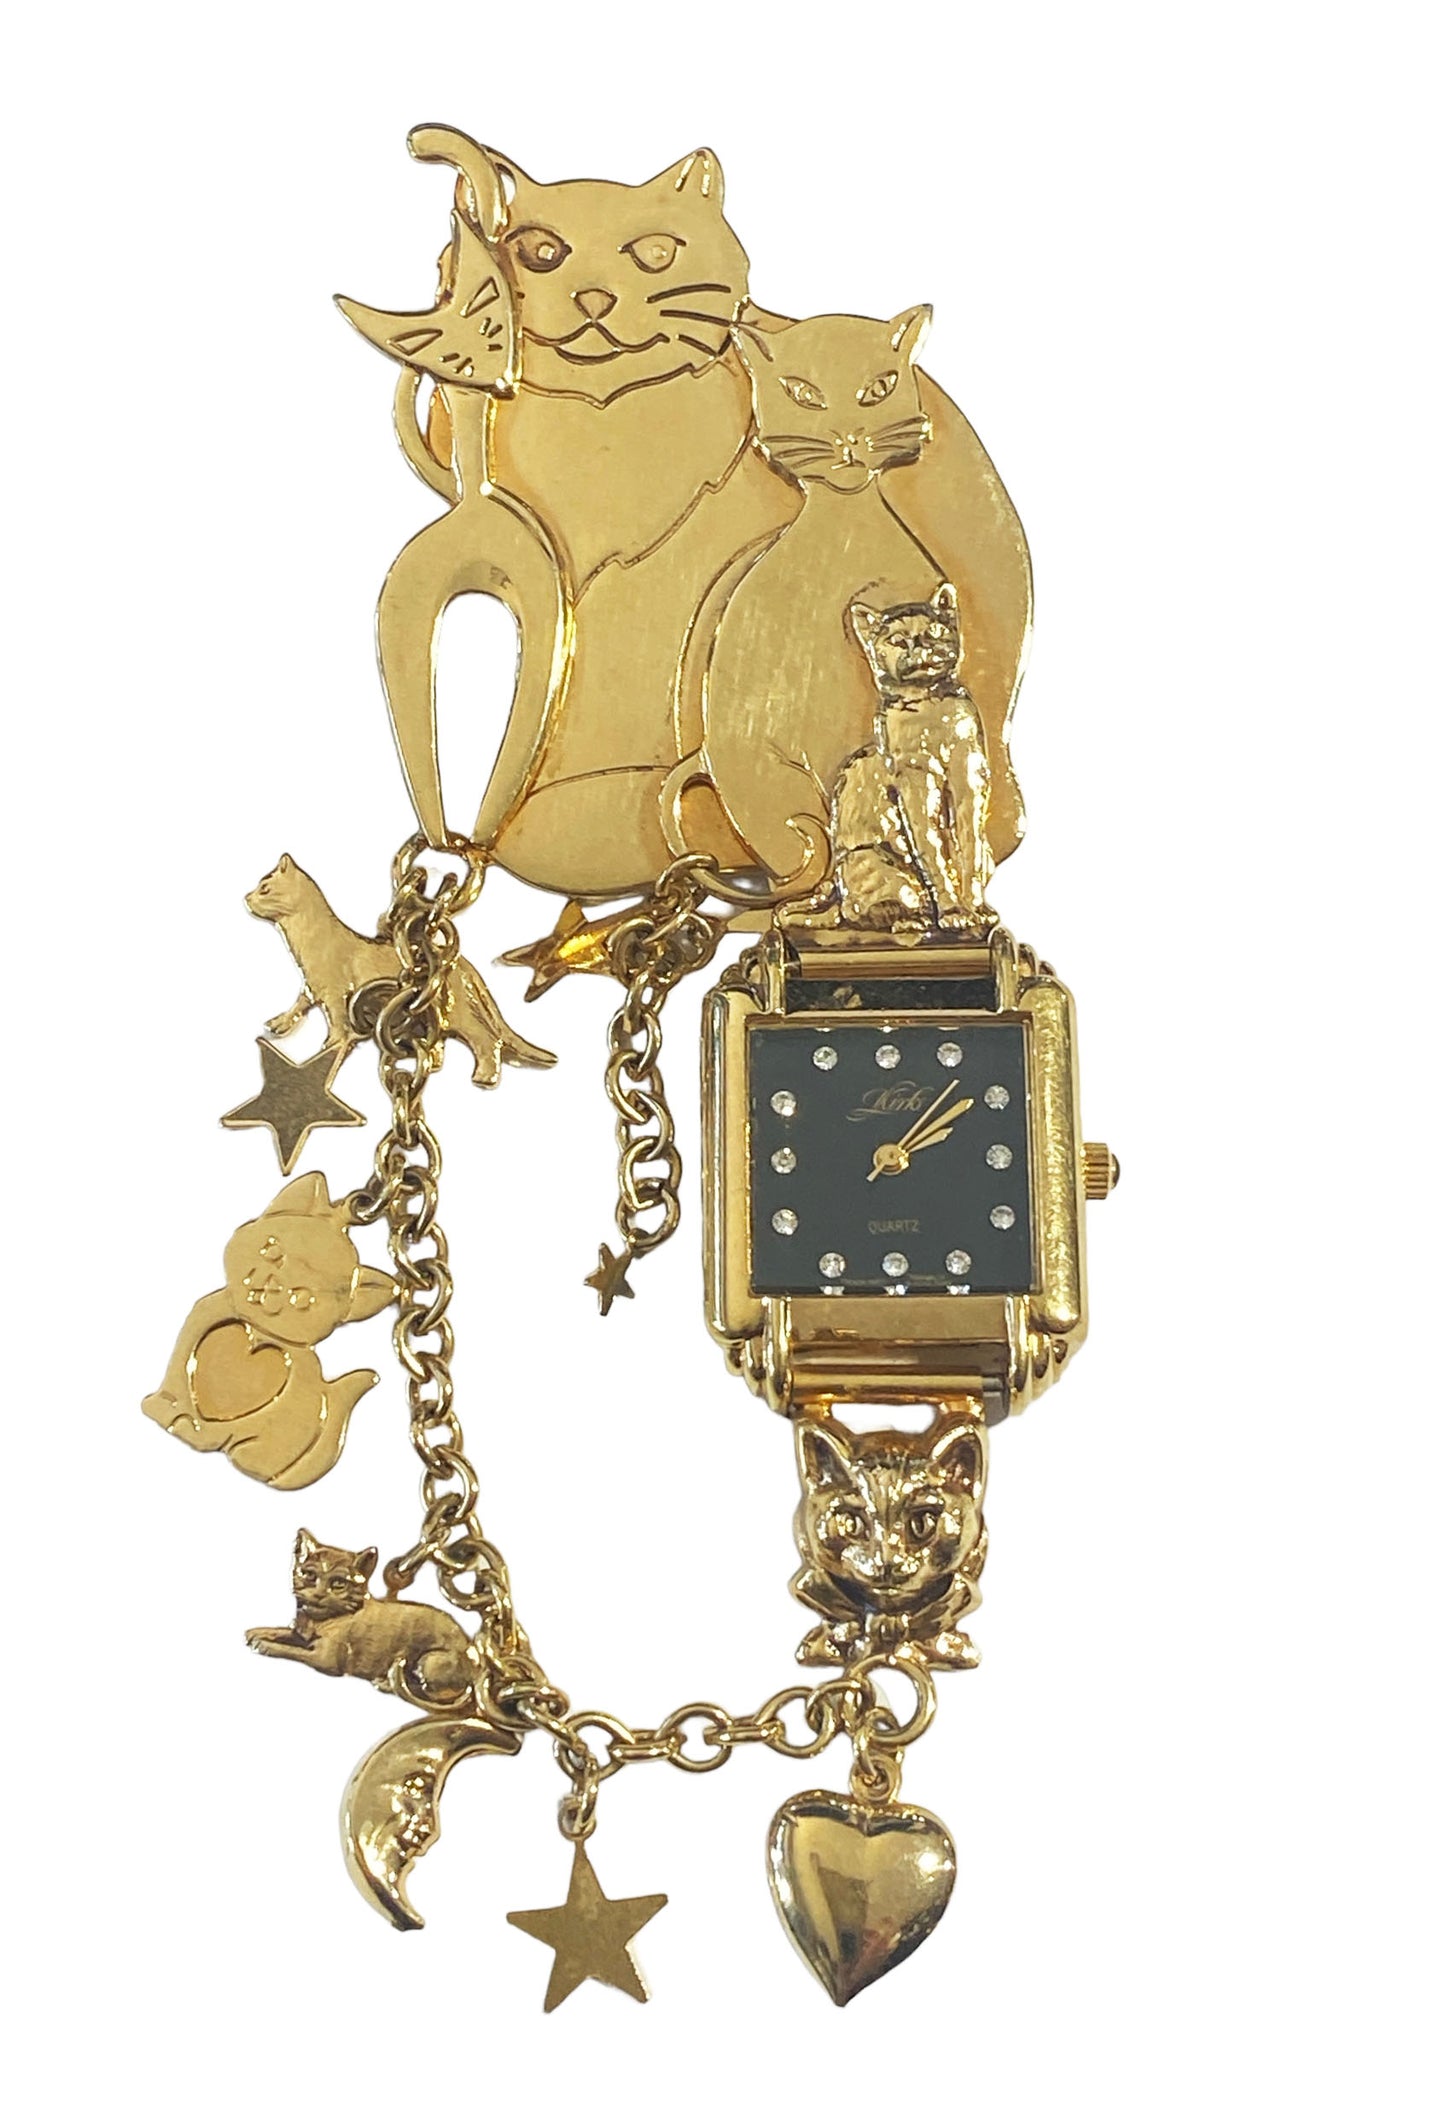 #7149 Rare Vintage Kirk's Folly  Gold Tone  Cat Watch Moving Charm brooch